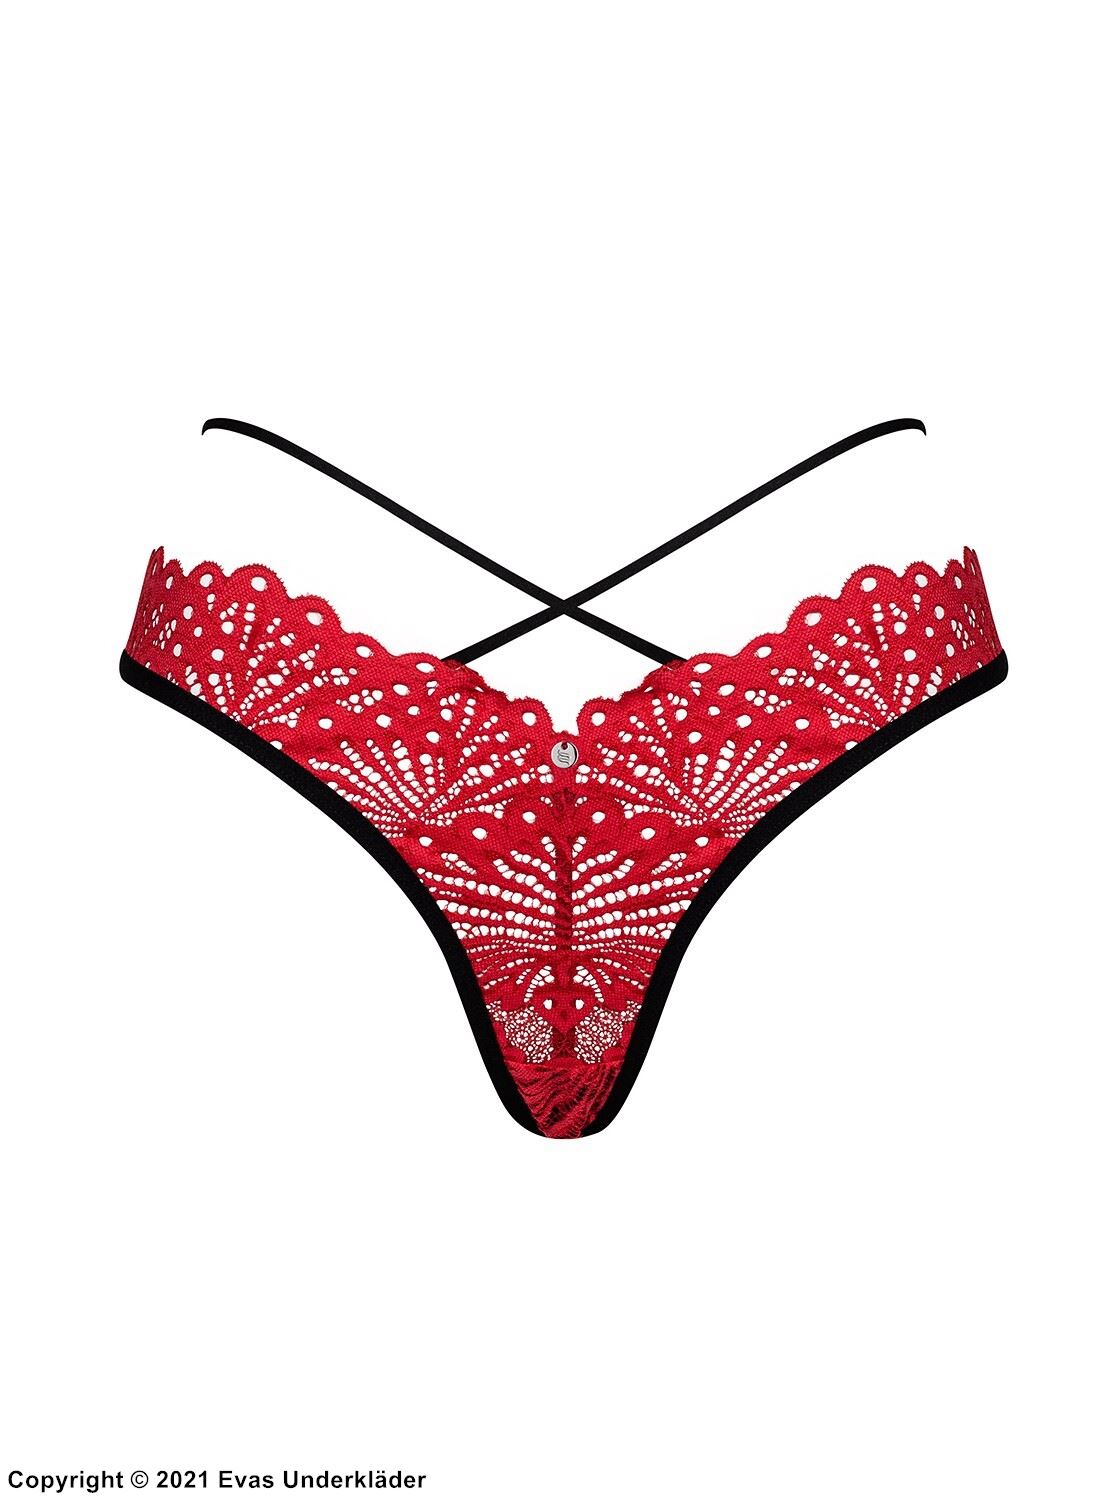 T-string, openwork lace, crossing straps, ring